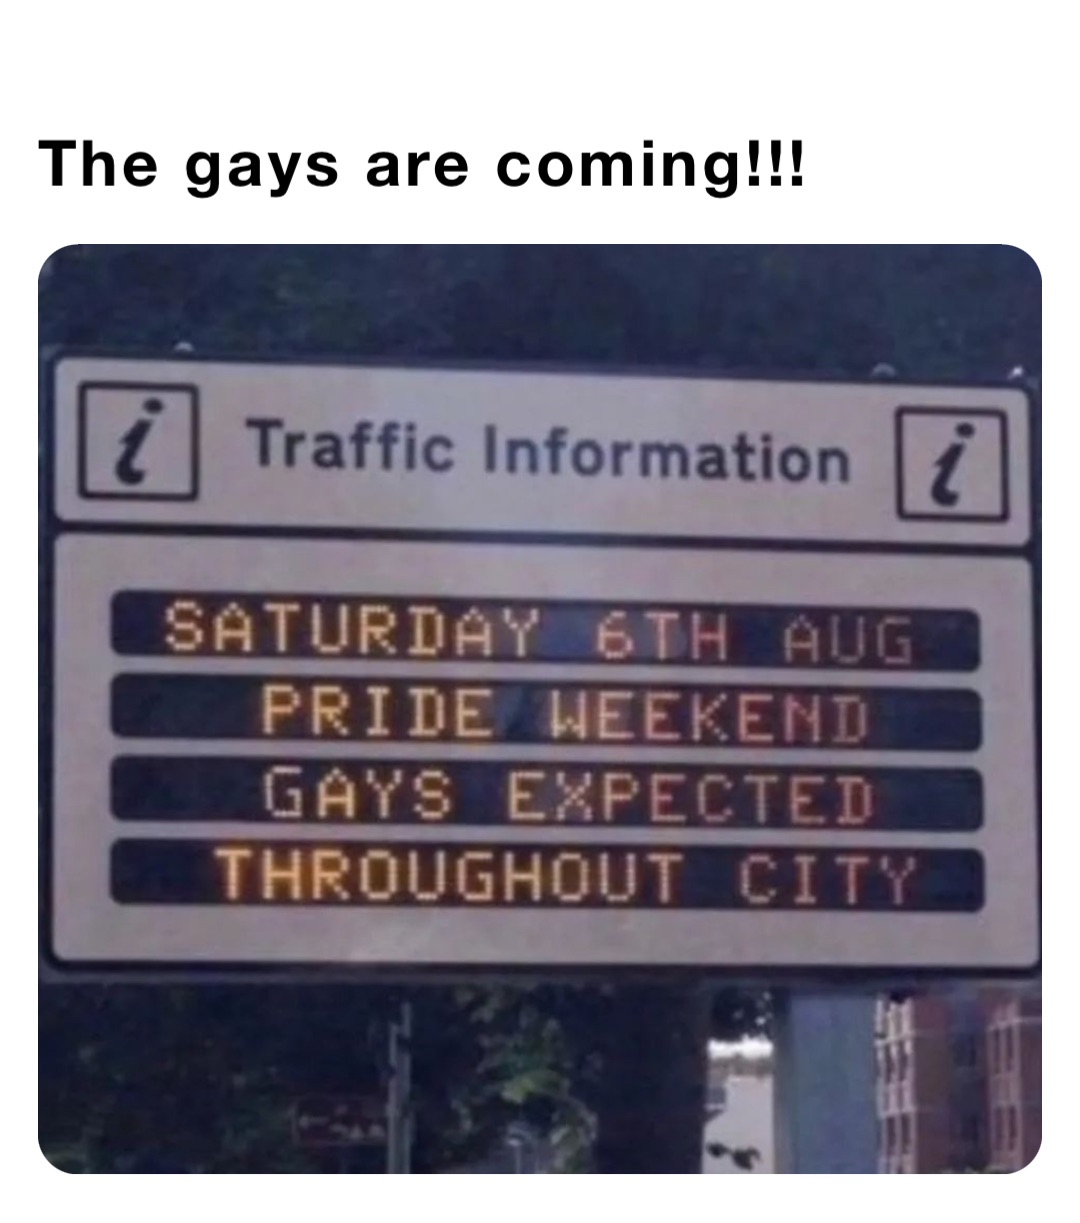 The gays are coming!!!